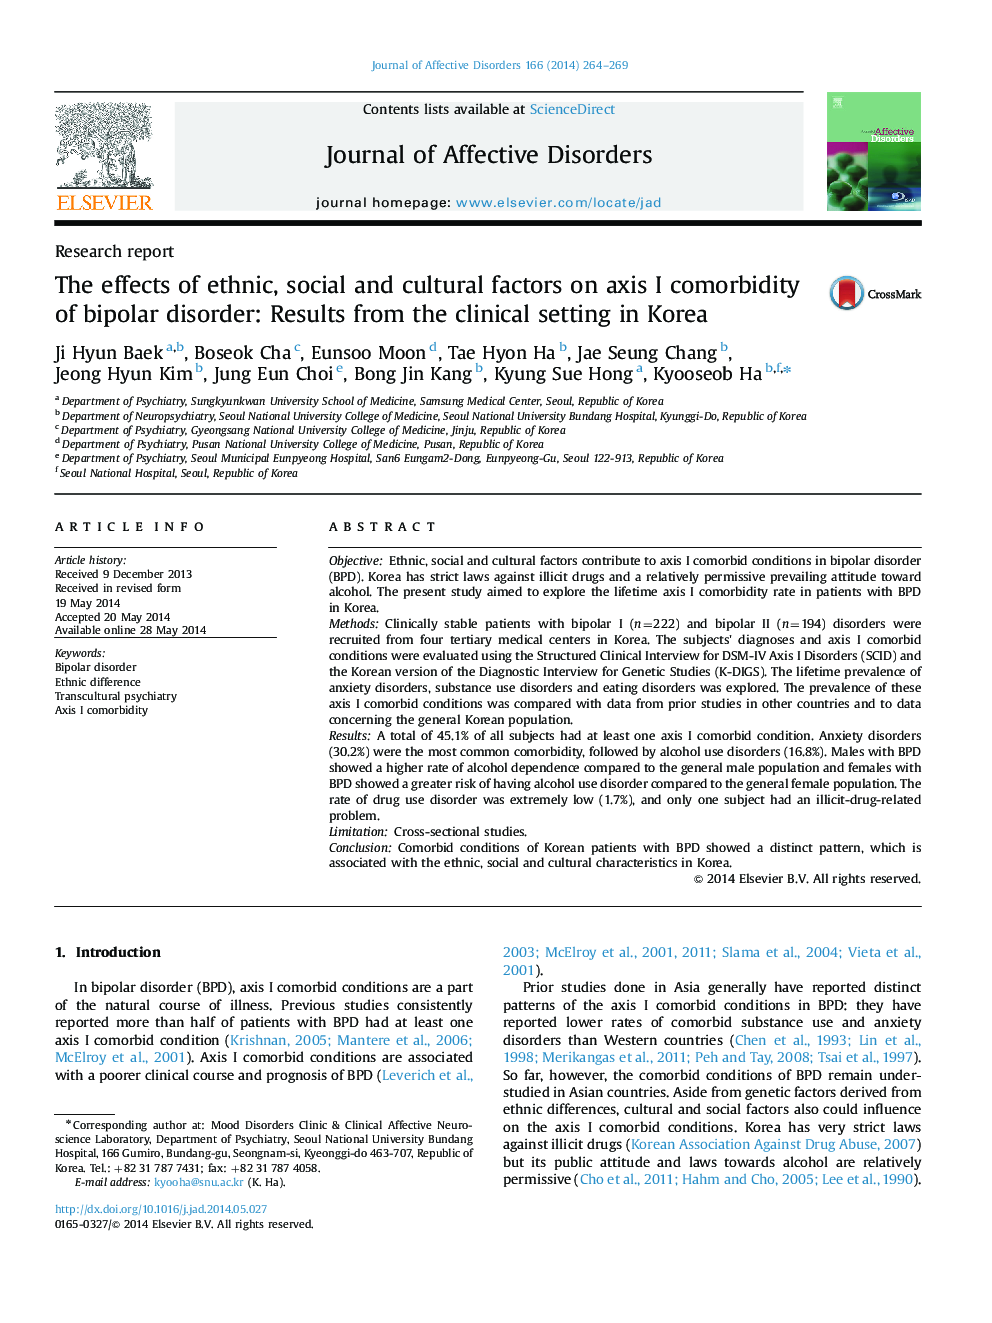 The effects of ethnic, social and cultural factors on axis I comorbidity of bipolar disorder: Results from the clinical setting in Korea